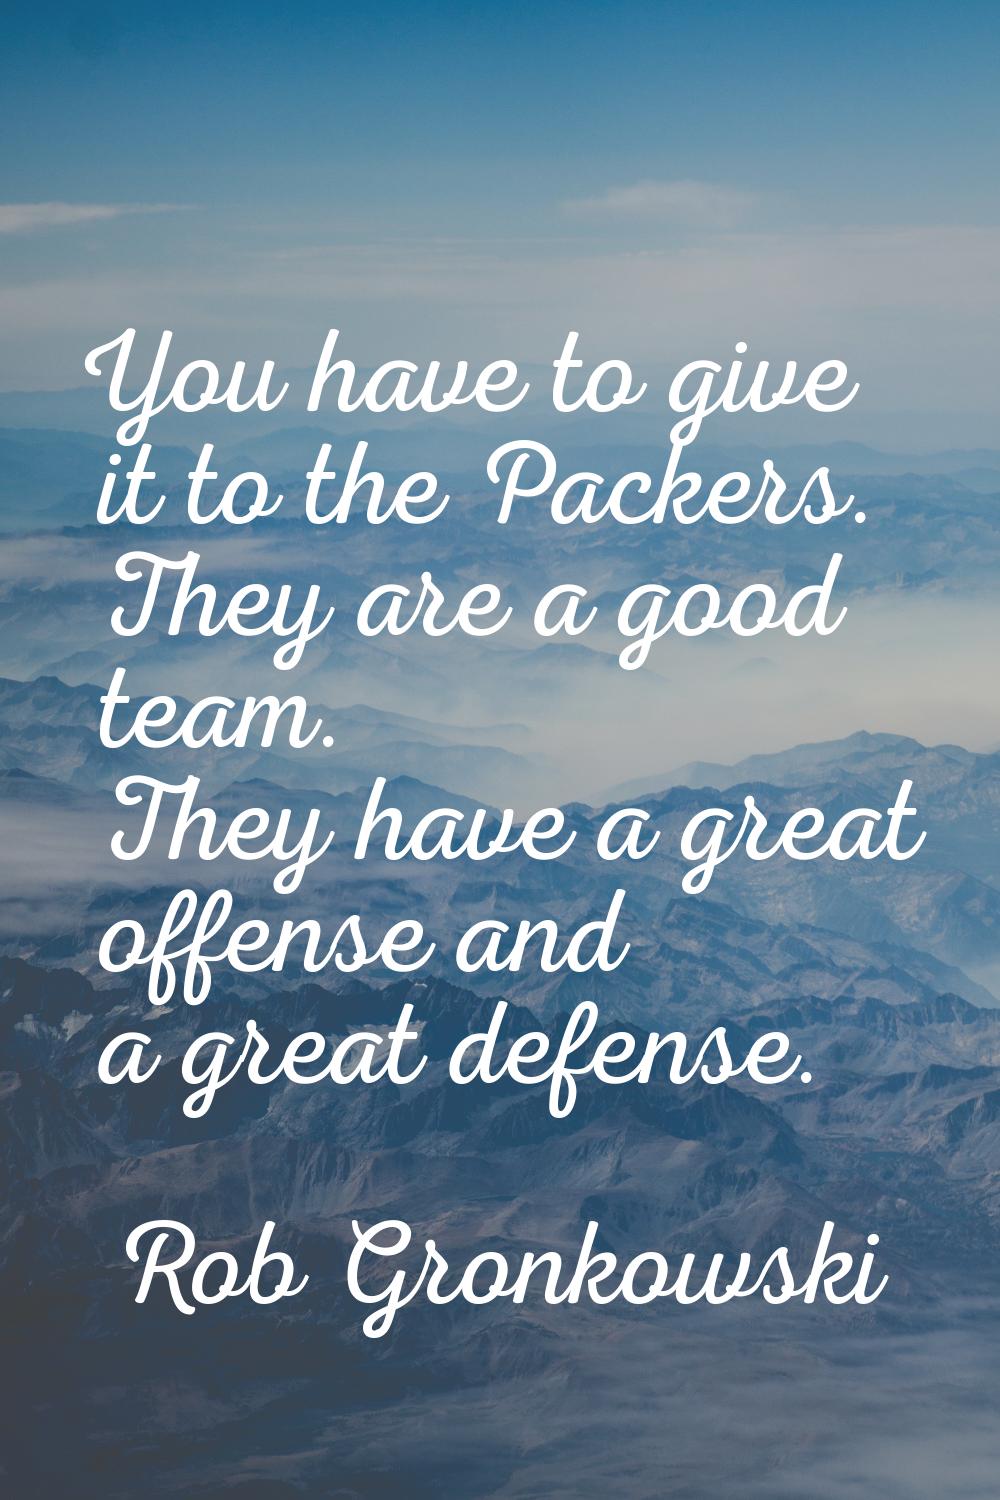 You have to give it to the Packers. They are a good team. They have a great offense and a great def